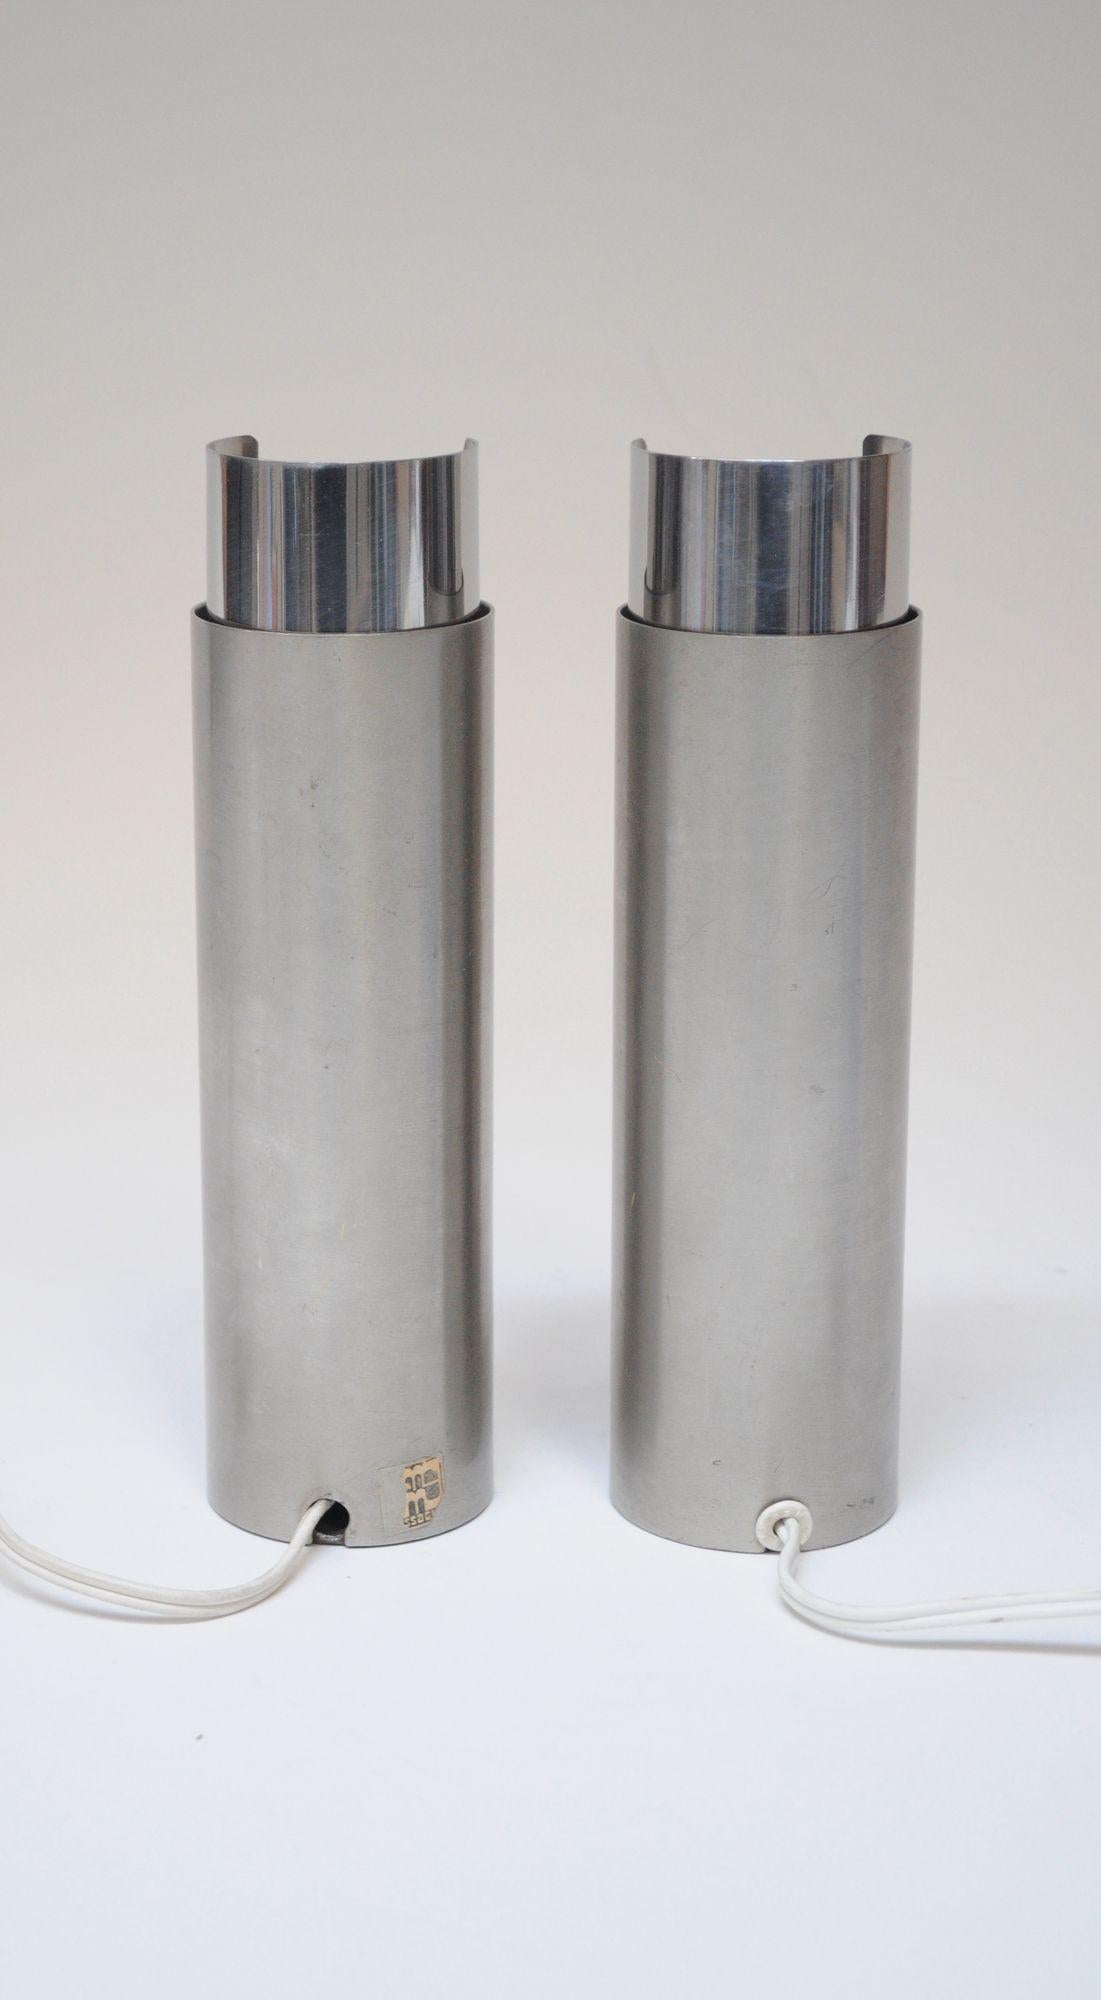 Late 20th Century Pair of Small Italian Cylindrical Aluminum Bedside Lamps by Gaetano Missaglia For Sale